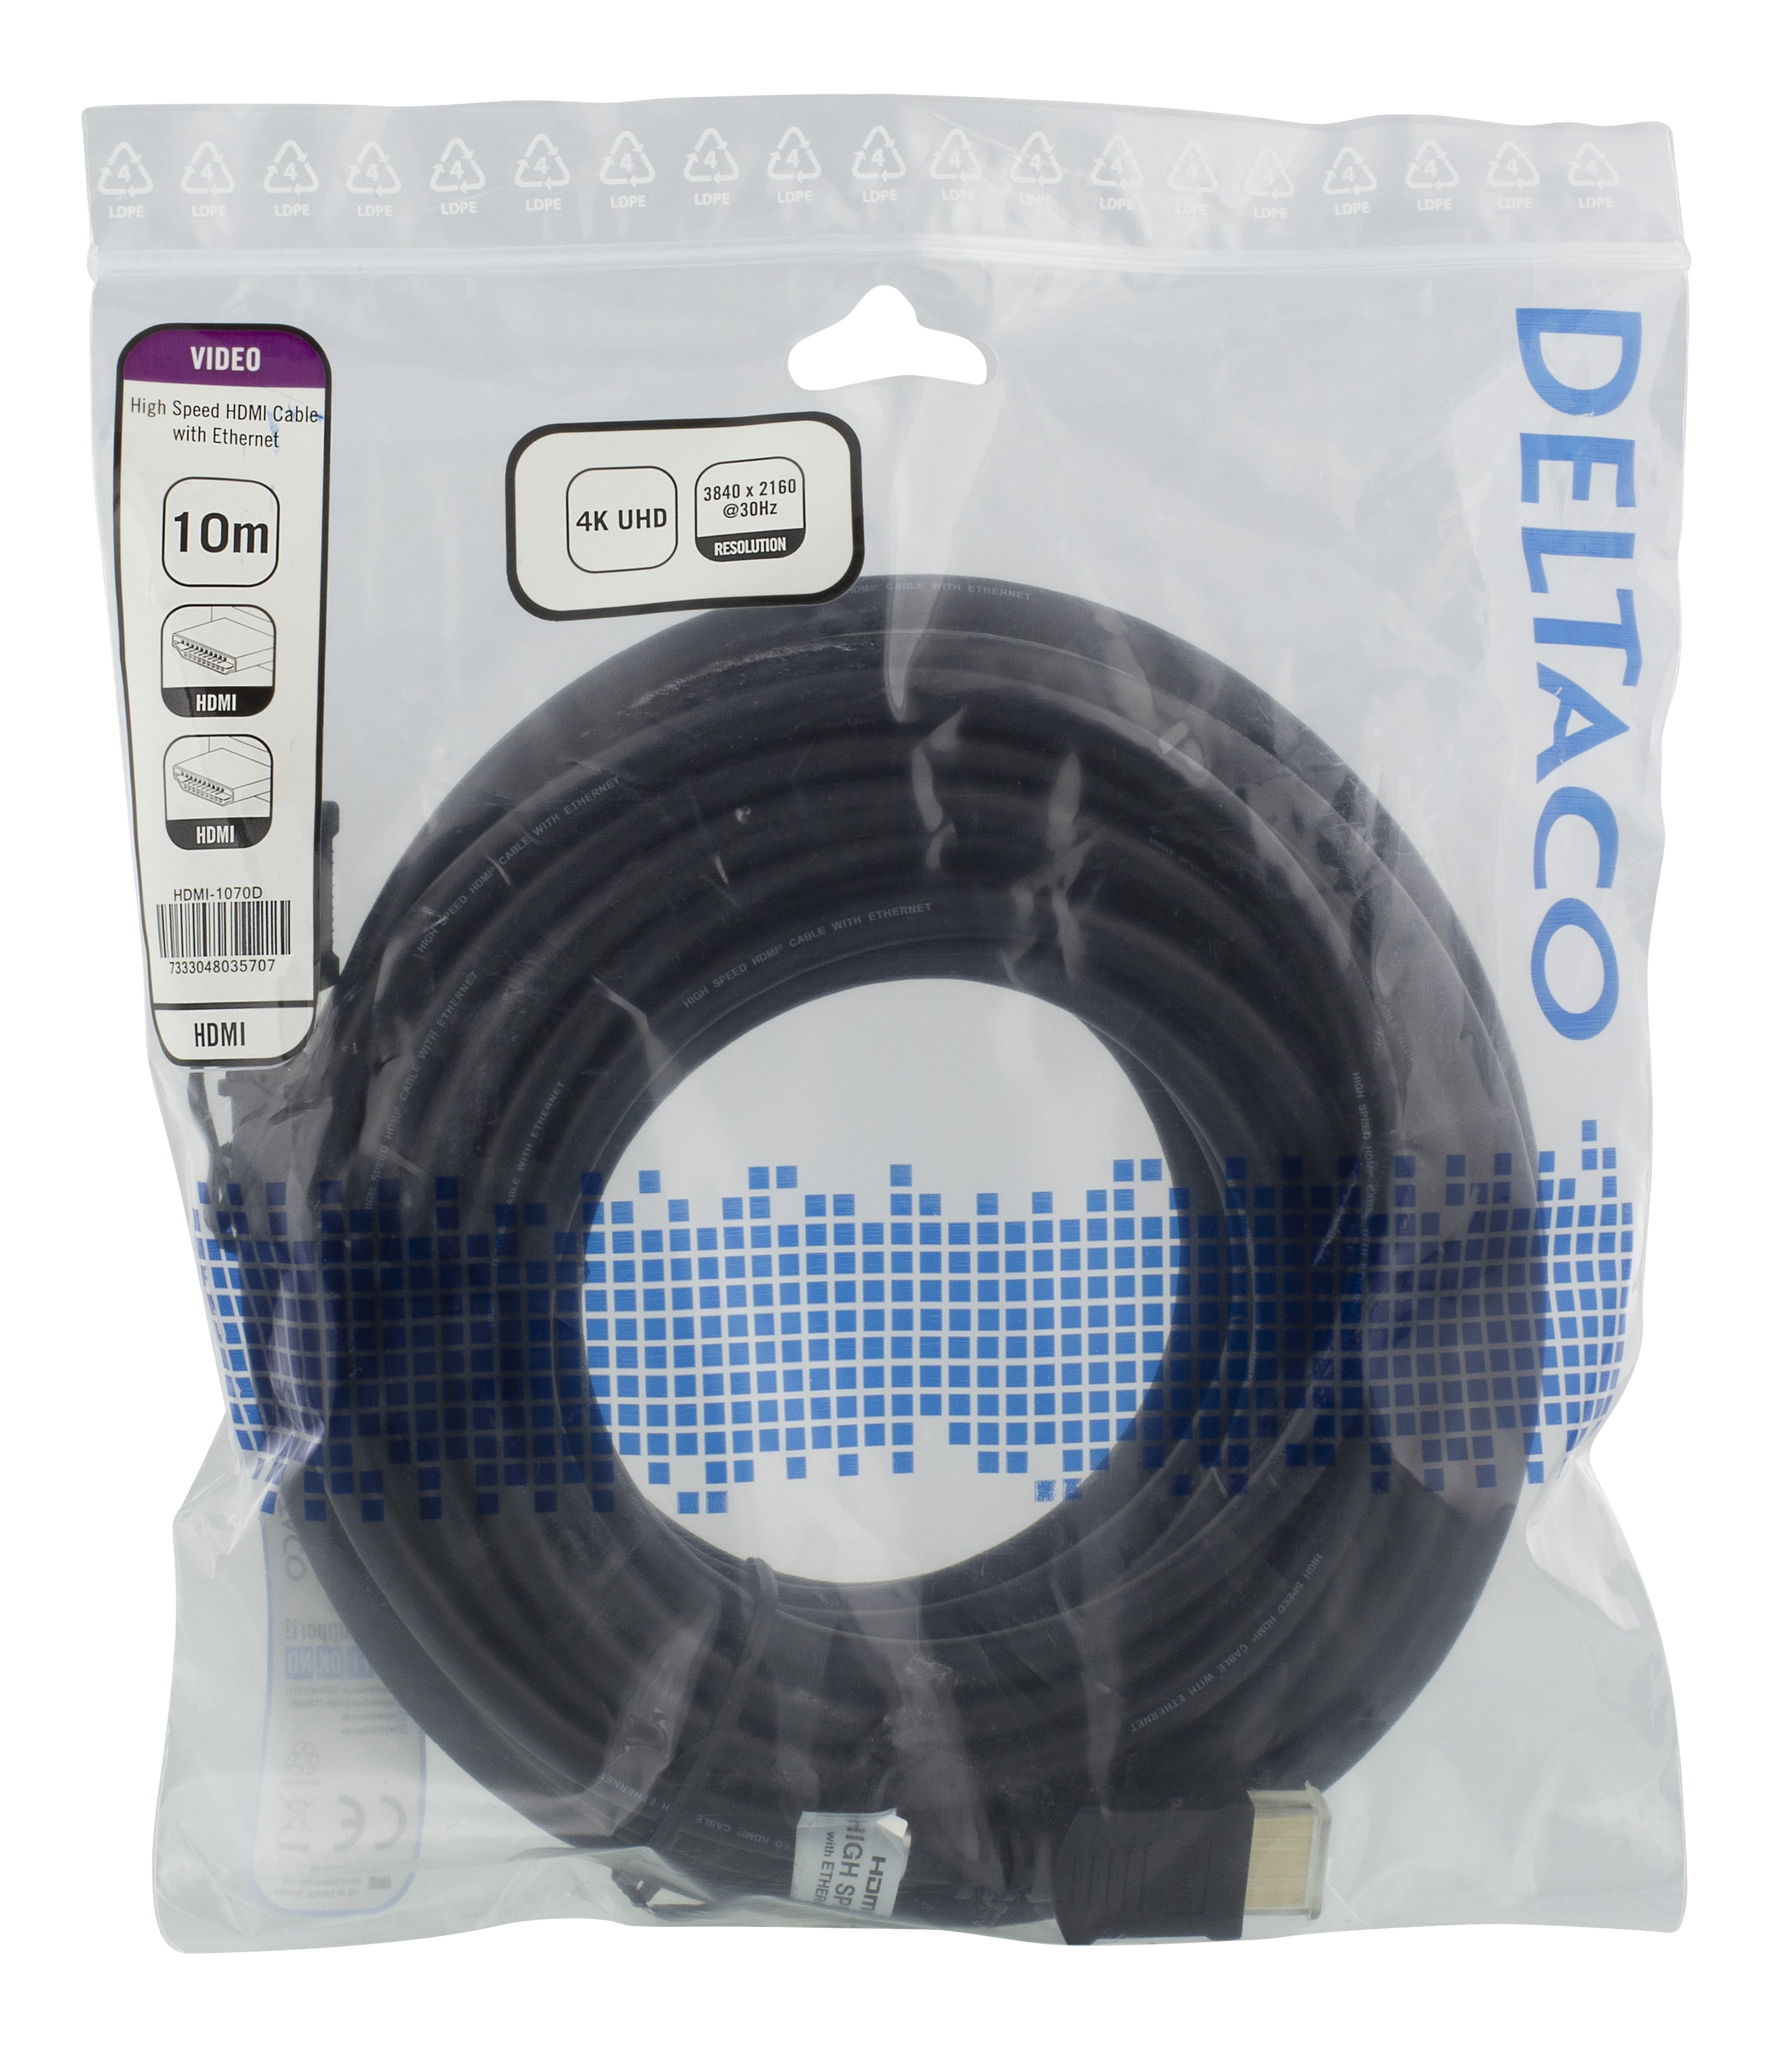 Deltaco High-Speed HDMI cable, 10 m, Ethernet, 4K UHD, black